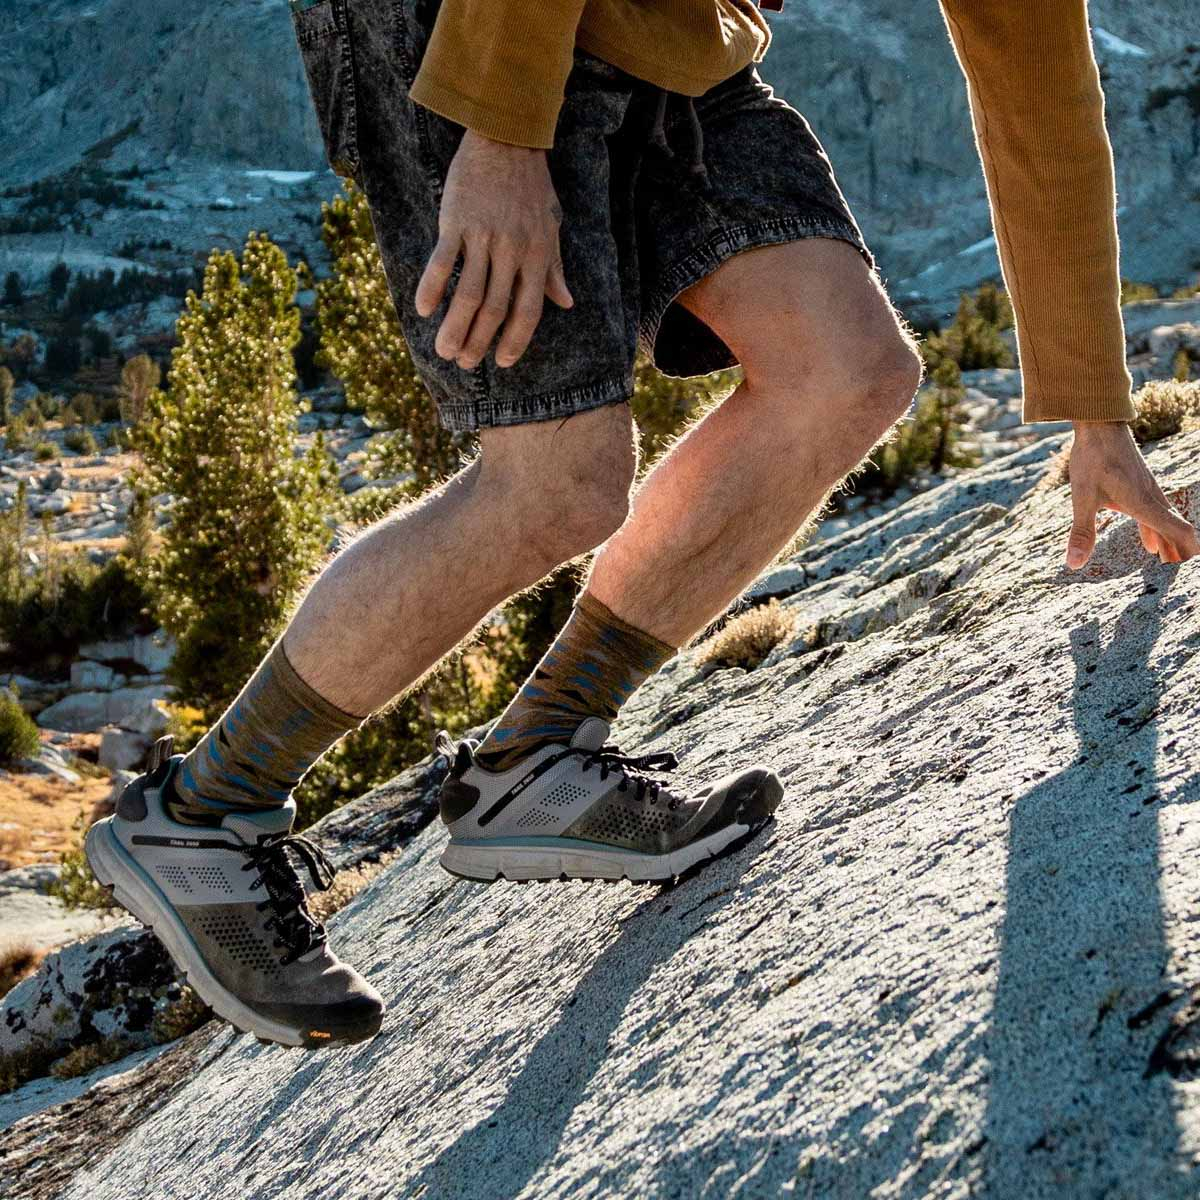 Danner Trail 2650 Mesh, with Vibram’s legendary Megagrip rubber compound for enhanced traction in every step, whether wet or dry